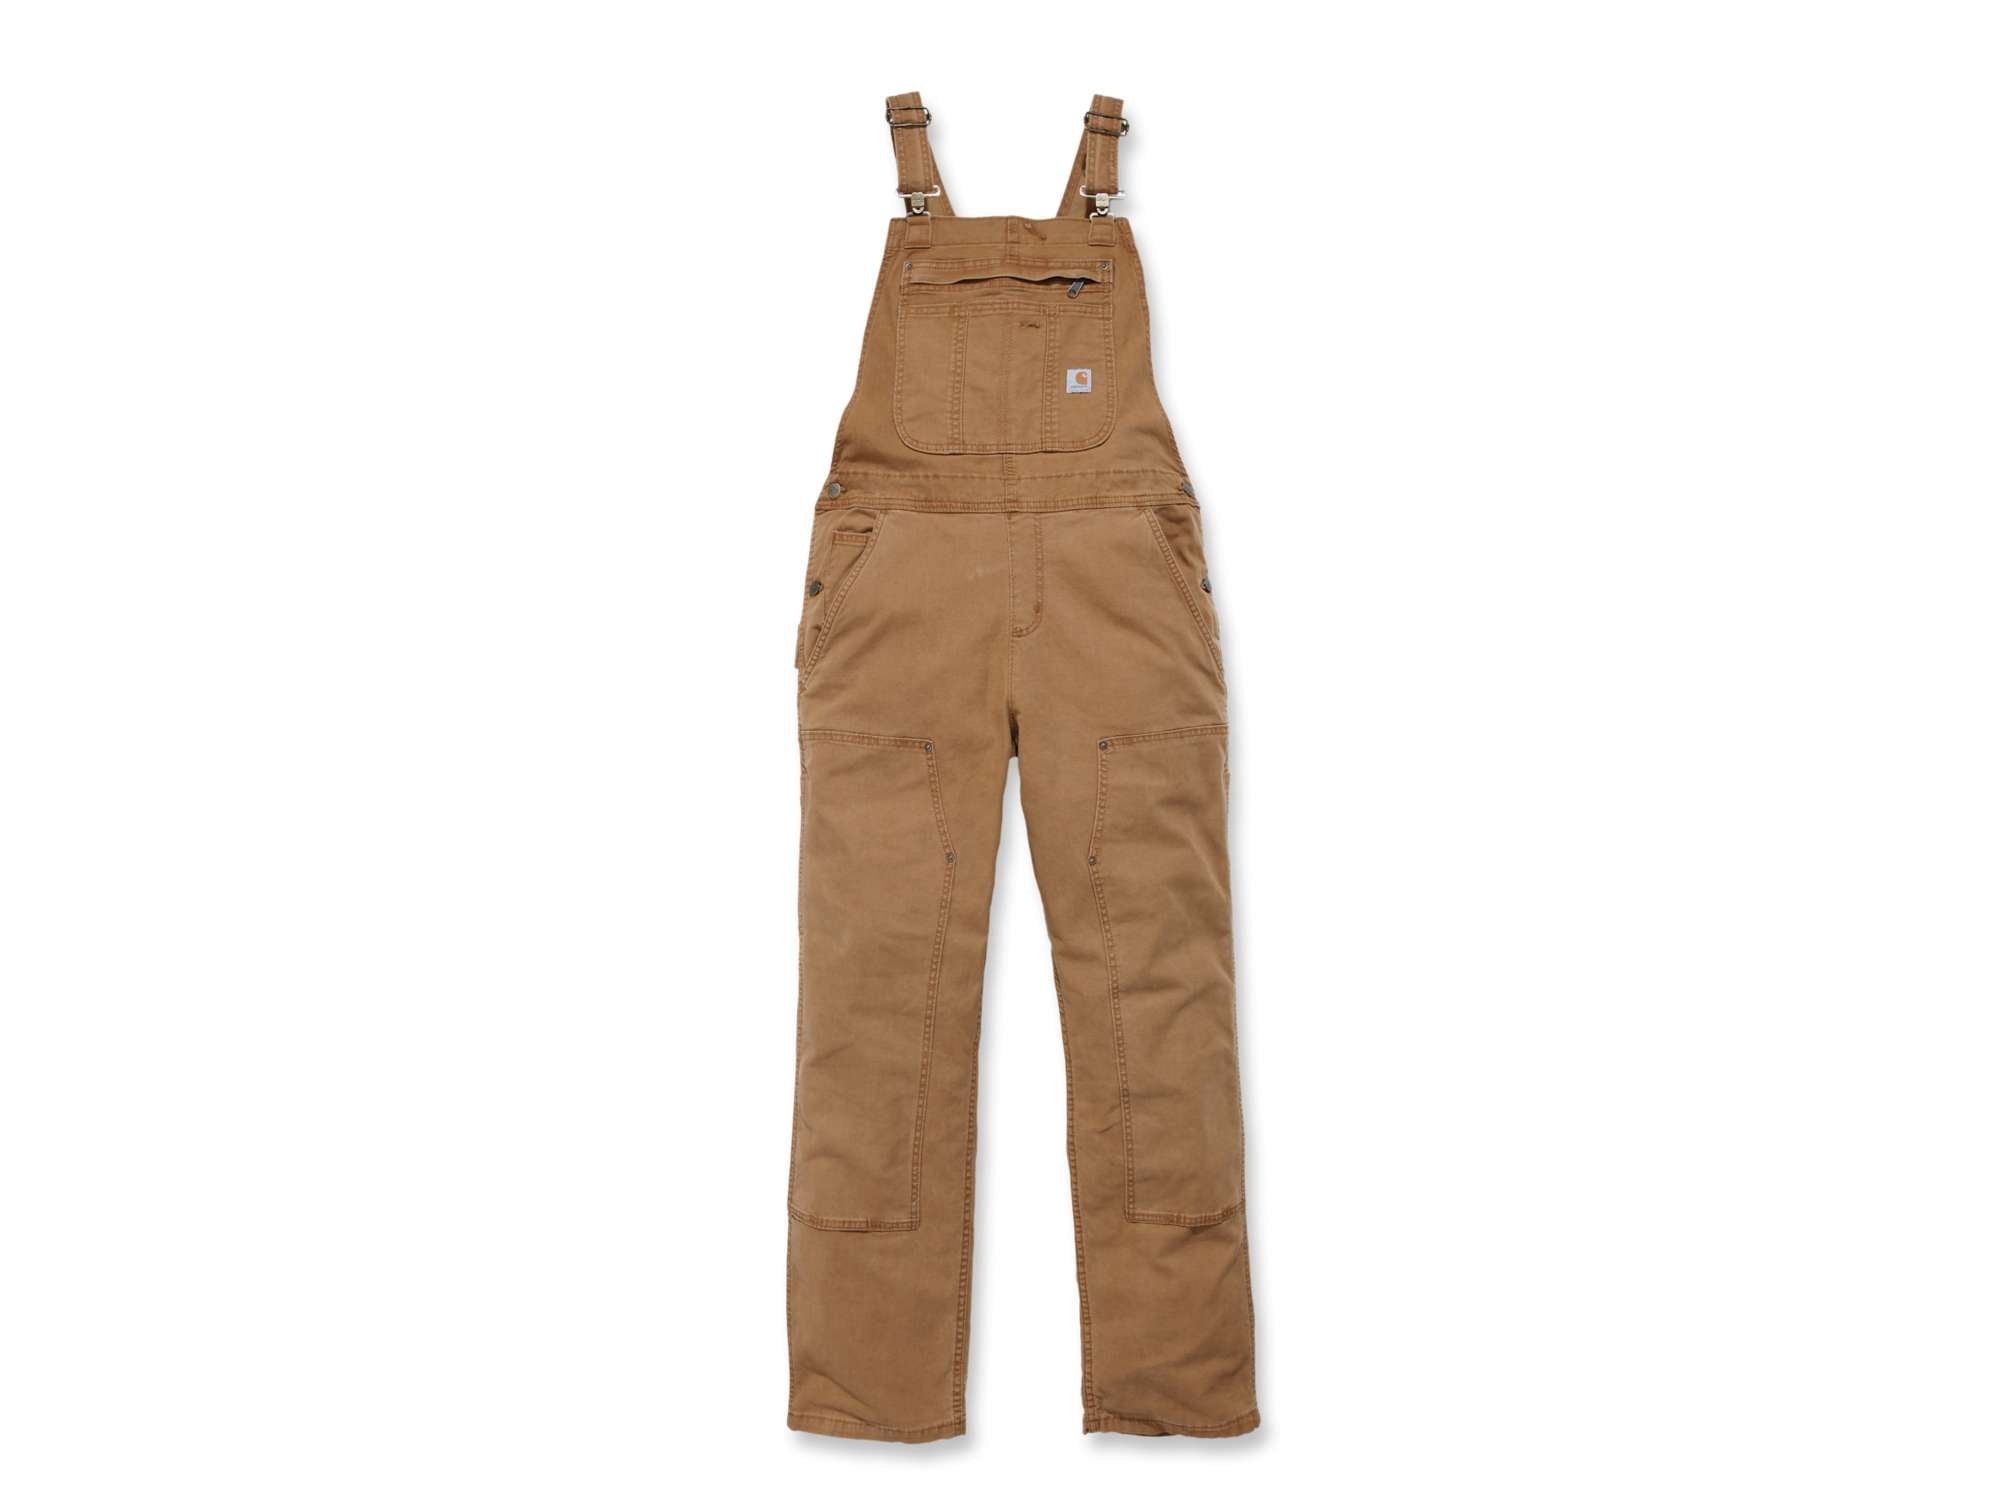 Carhartt Womens Crawford Double Front Pants Dungarees Slim Fit